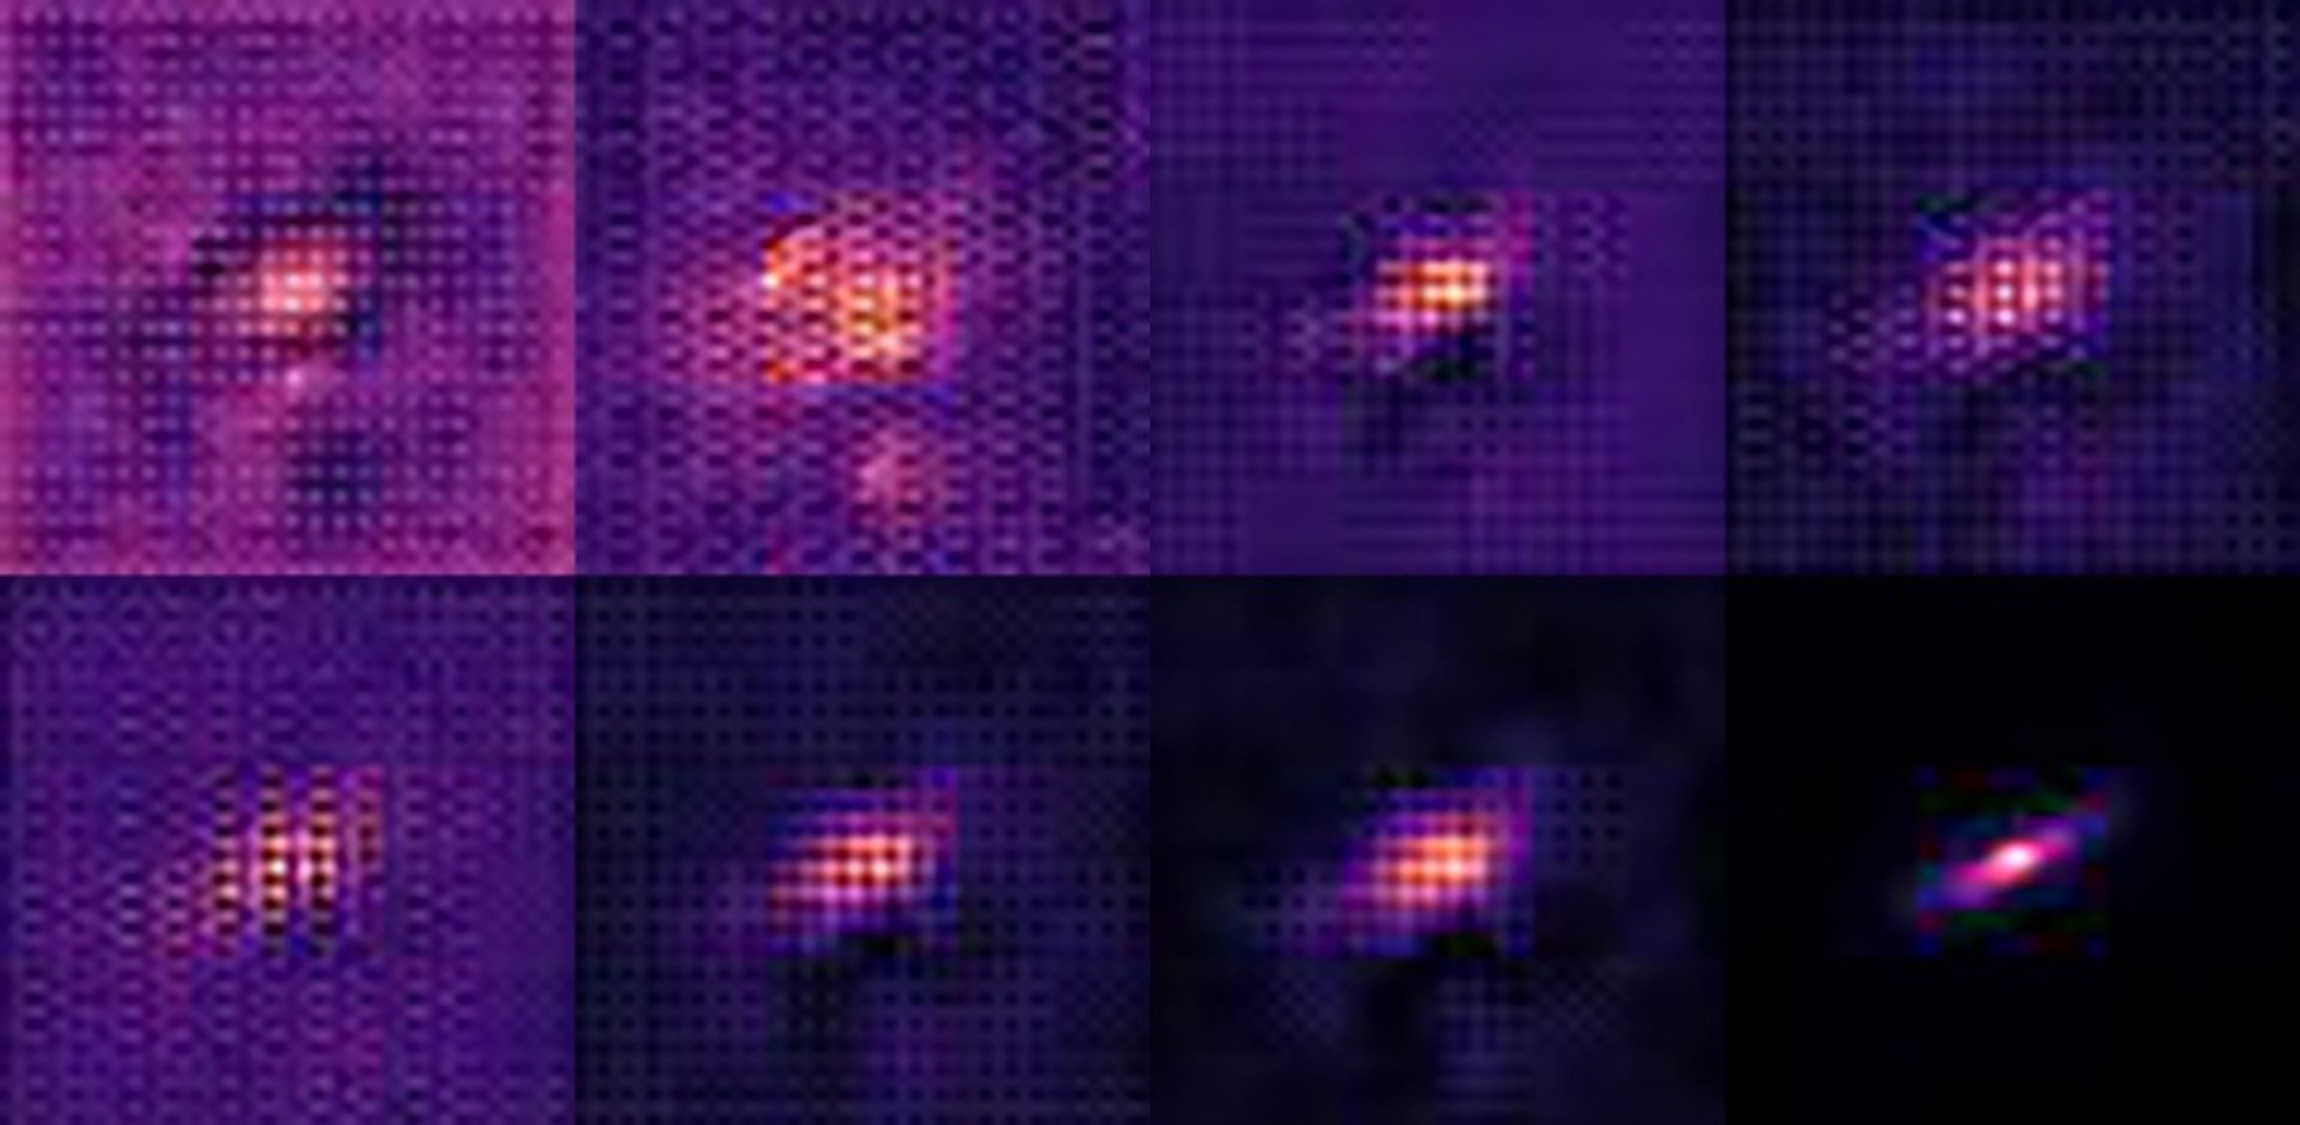 How AI can make galactic telescope images ‘sharper’